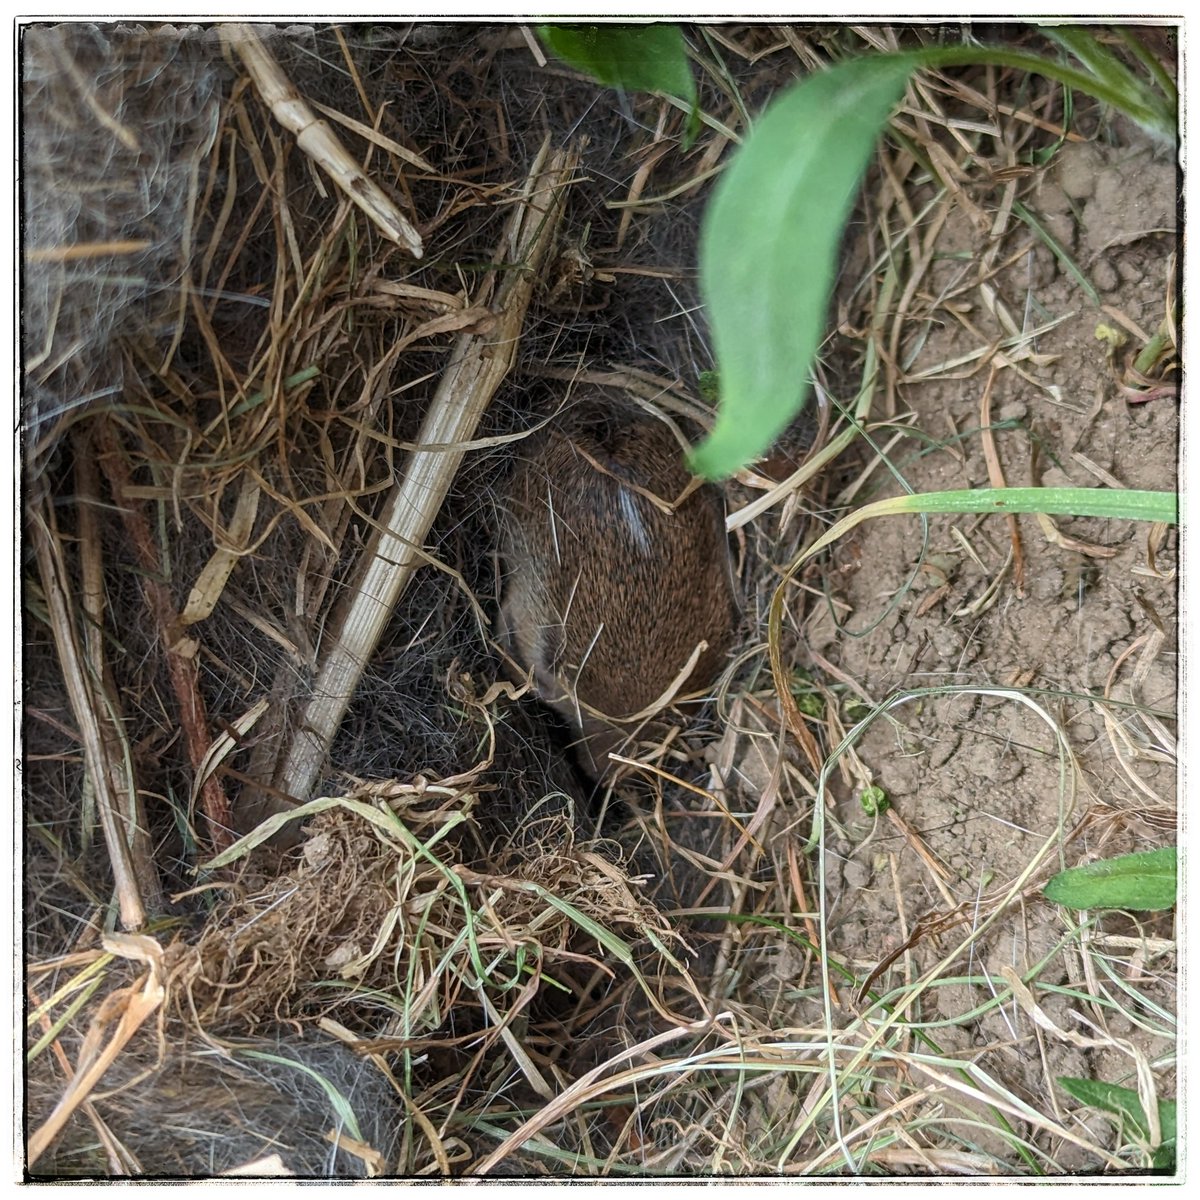 Amie(our dog) has been sniffing around a truck rim that had been used for a fire pit. Found 2 little baby bunnies and have no idea how many there are. I moved back everything and will let them sleep. 

#rabbit #BabyBunnies #gardening #RandomFinds #HappyMonday #OldSouth #Ldnont